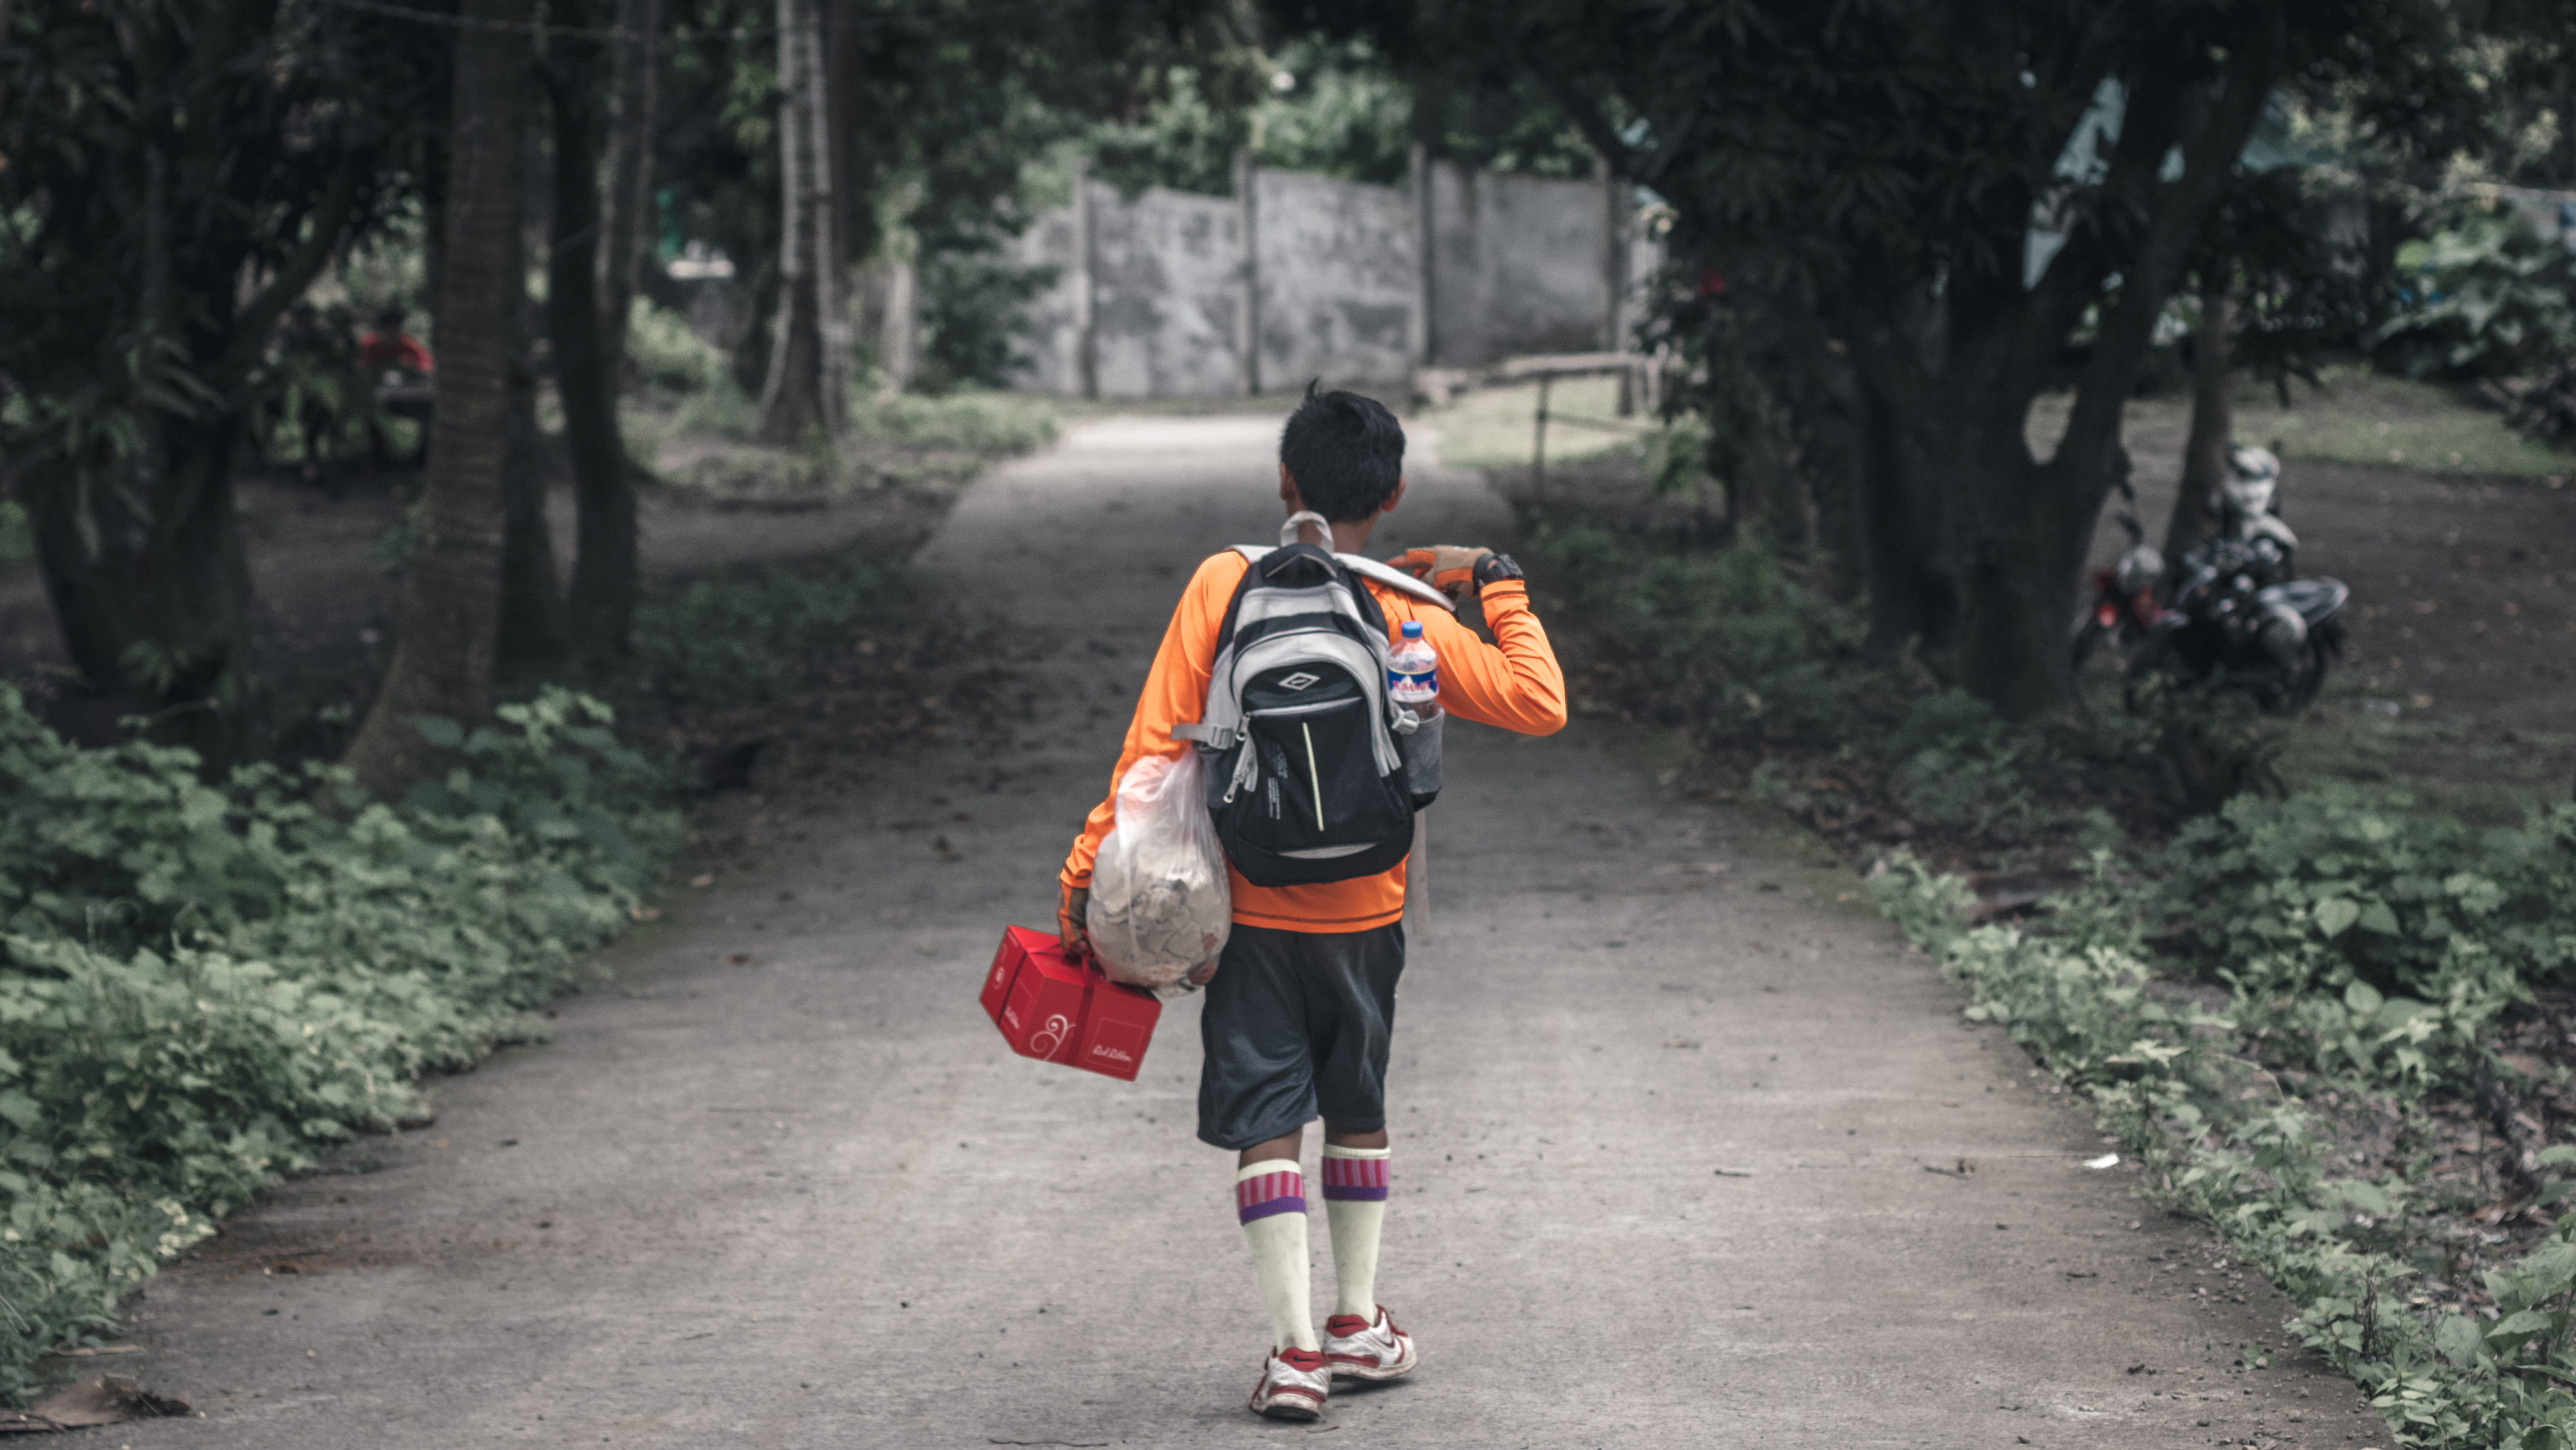 boy with backpack walking on pathway between trees, boy in orange long-sleeved shirt carrying backpack walking on pathway